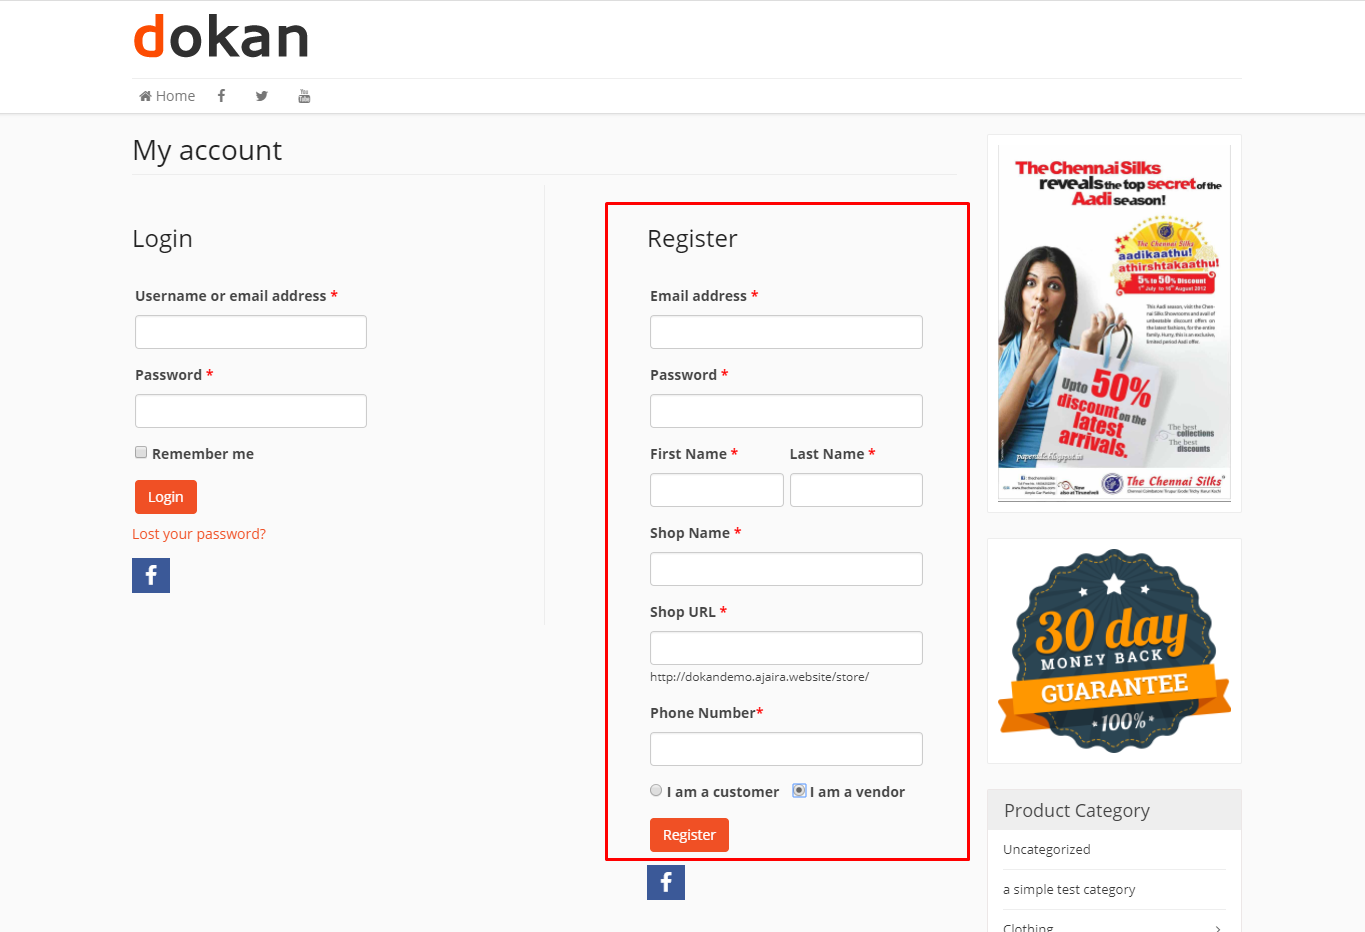 This is a screenshot of the Dokan registration form for vendors.